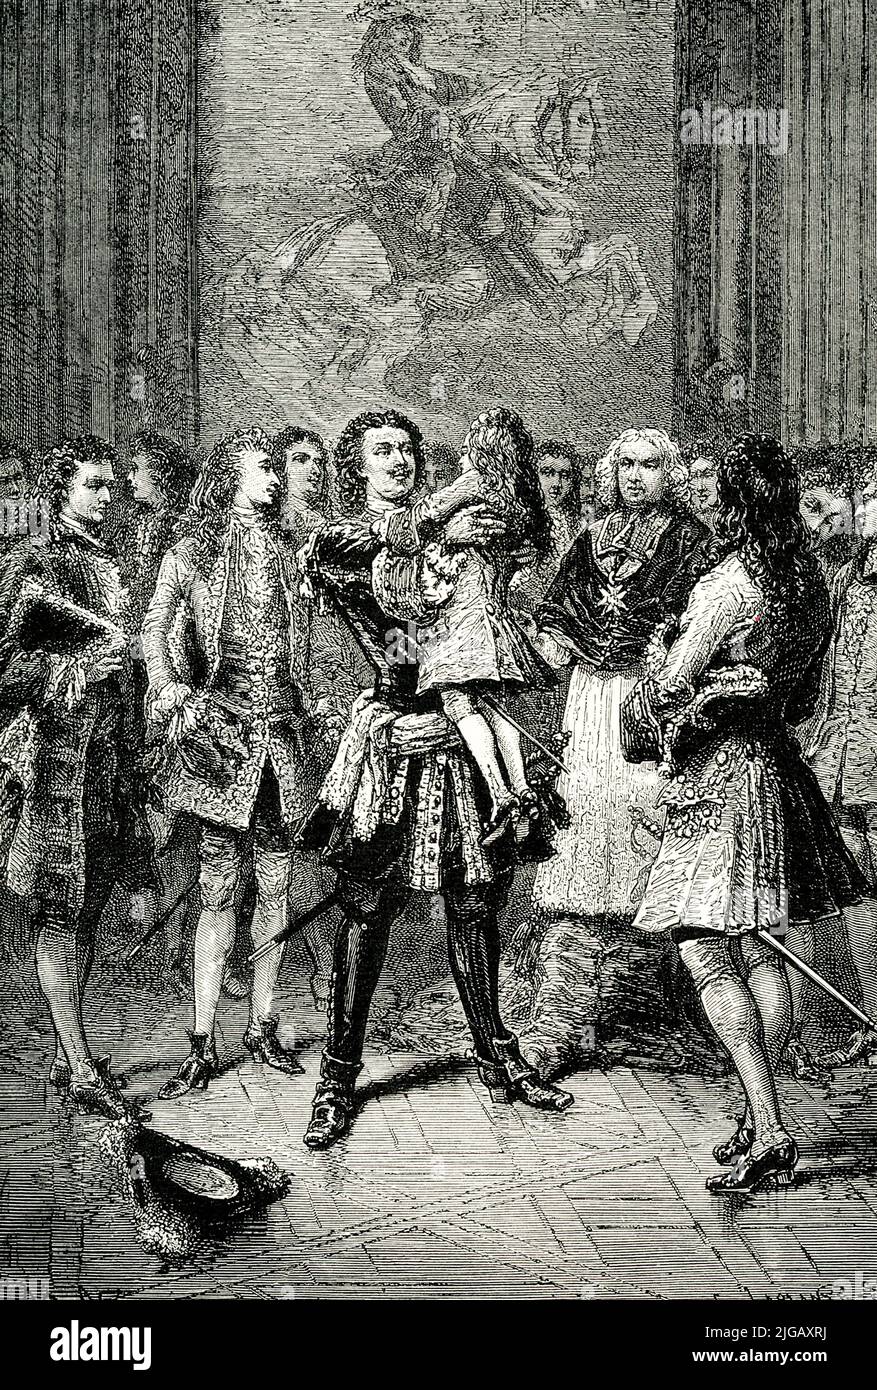 The 1906 caption reads ” PETER EMBRACING LOUIS XV. OF FRANCE.—In his travels through Europe, Peter came to the French court [this was in 1717] where the King, Louis XV., was still a child. Peter carefully maintained the dignity of superior rank toward all the French courtiers, even the Prince Regent; but toward little Louis he displayed a much admired mingling- of the superiority of age, the equality of rank, and the respect due the most powerful of European monarchs.” Stock Photo